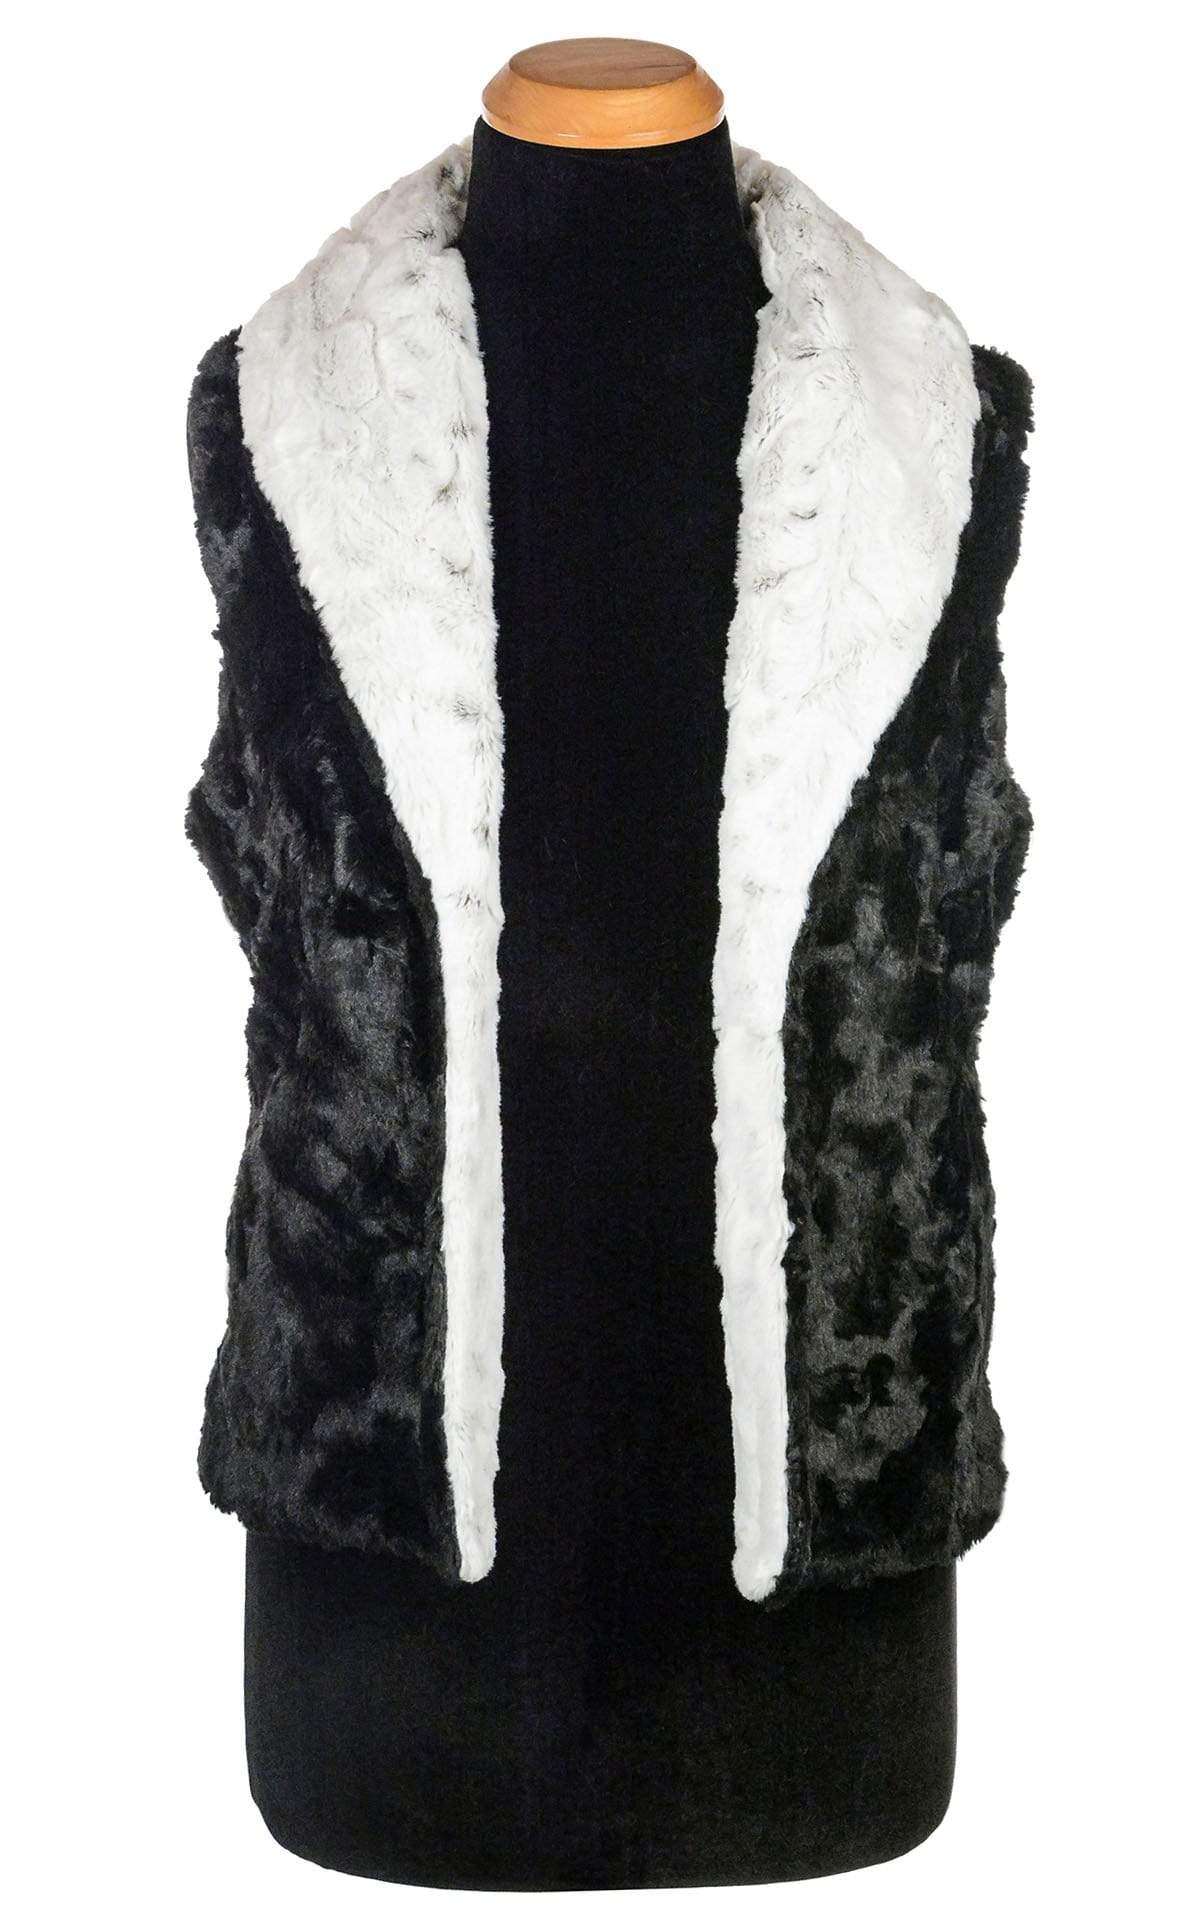 Open view Shawl Collar Vest Reversed | Winter Frost Faux Fur with Cuddly Black Faux Fur  | Handmade by Pandemonium Millinery | Seattle WA USA